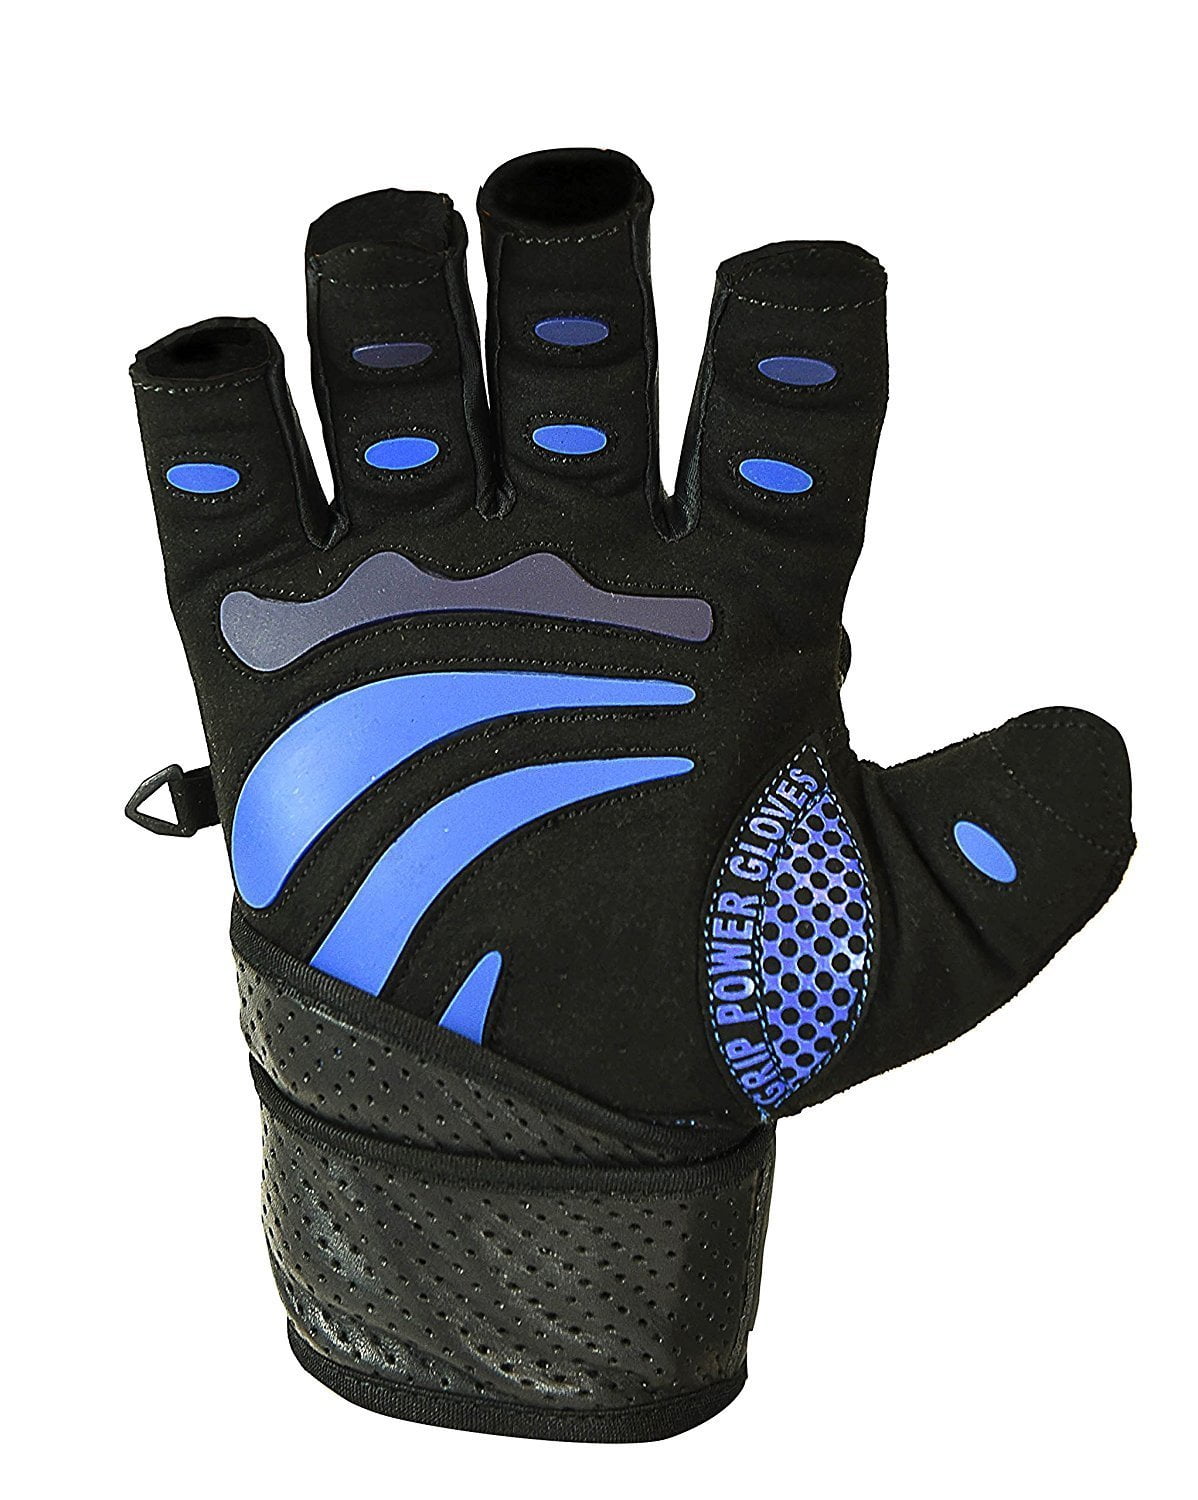 Gym Gloves Protect Your Hands & Improve Your Grip Weightlifting Grips 